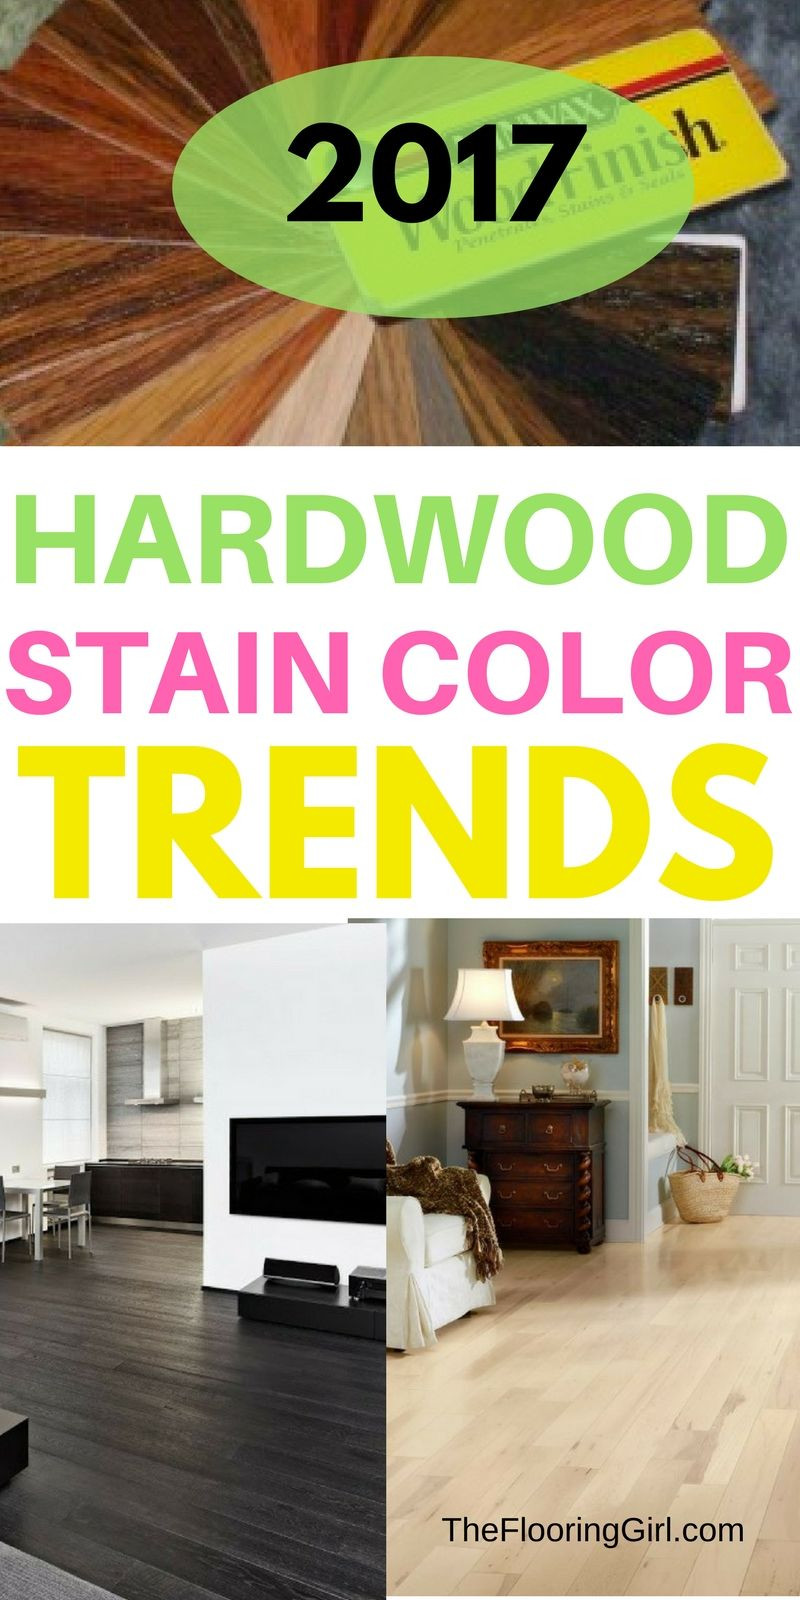 20 Wonderful Sanding Painted Hardwood Floors 2024 free download sanding painted hardwood floors of hardwood flooring stain color trends 2018 more from the flooring with regard to hardwood flooring stain color trends for 2017 hardwood colors that are in s